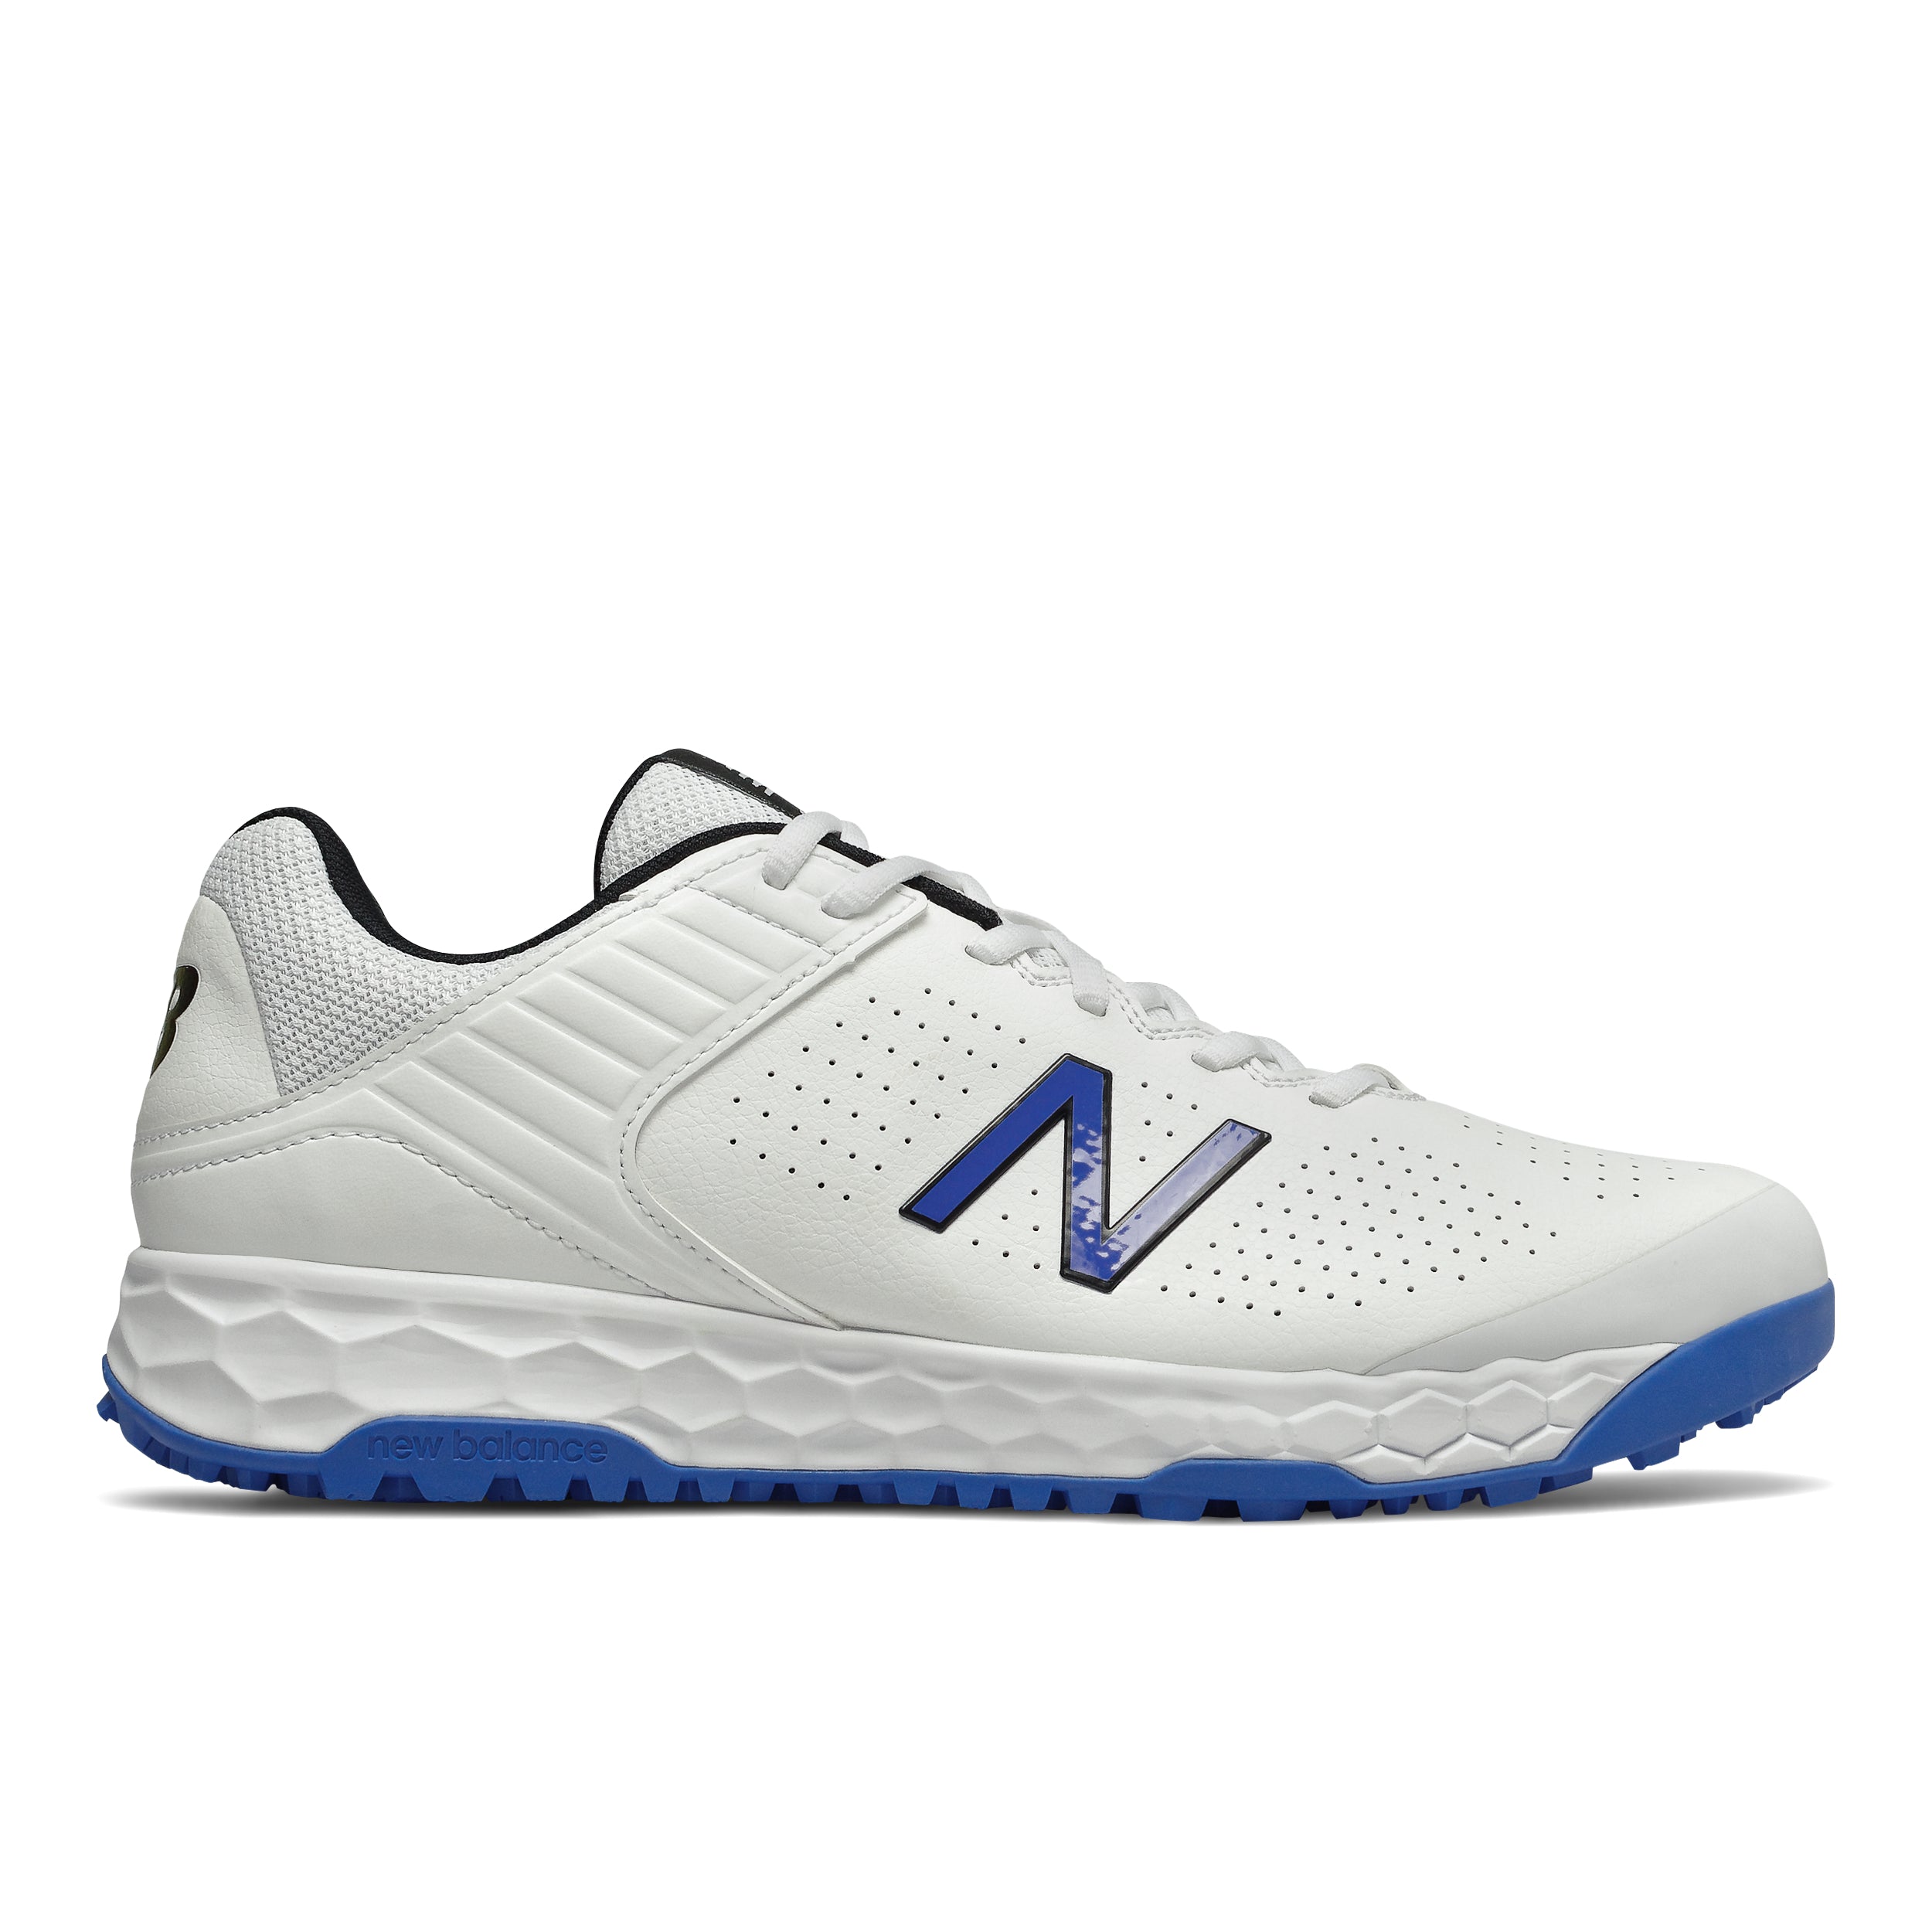 New Balance CK4020 C4 Rubber Sole – The 